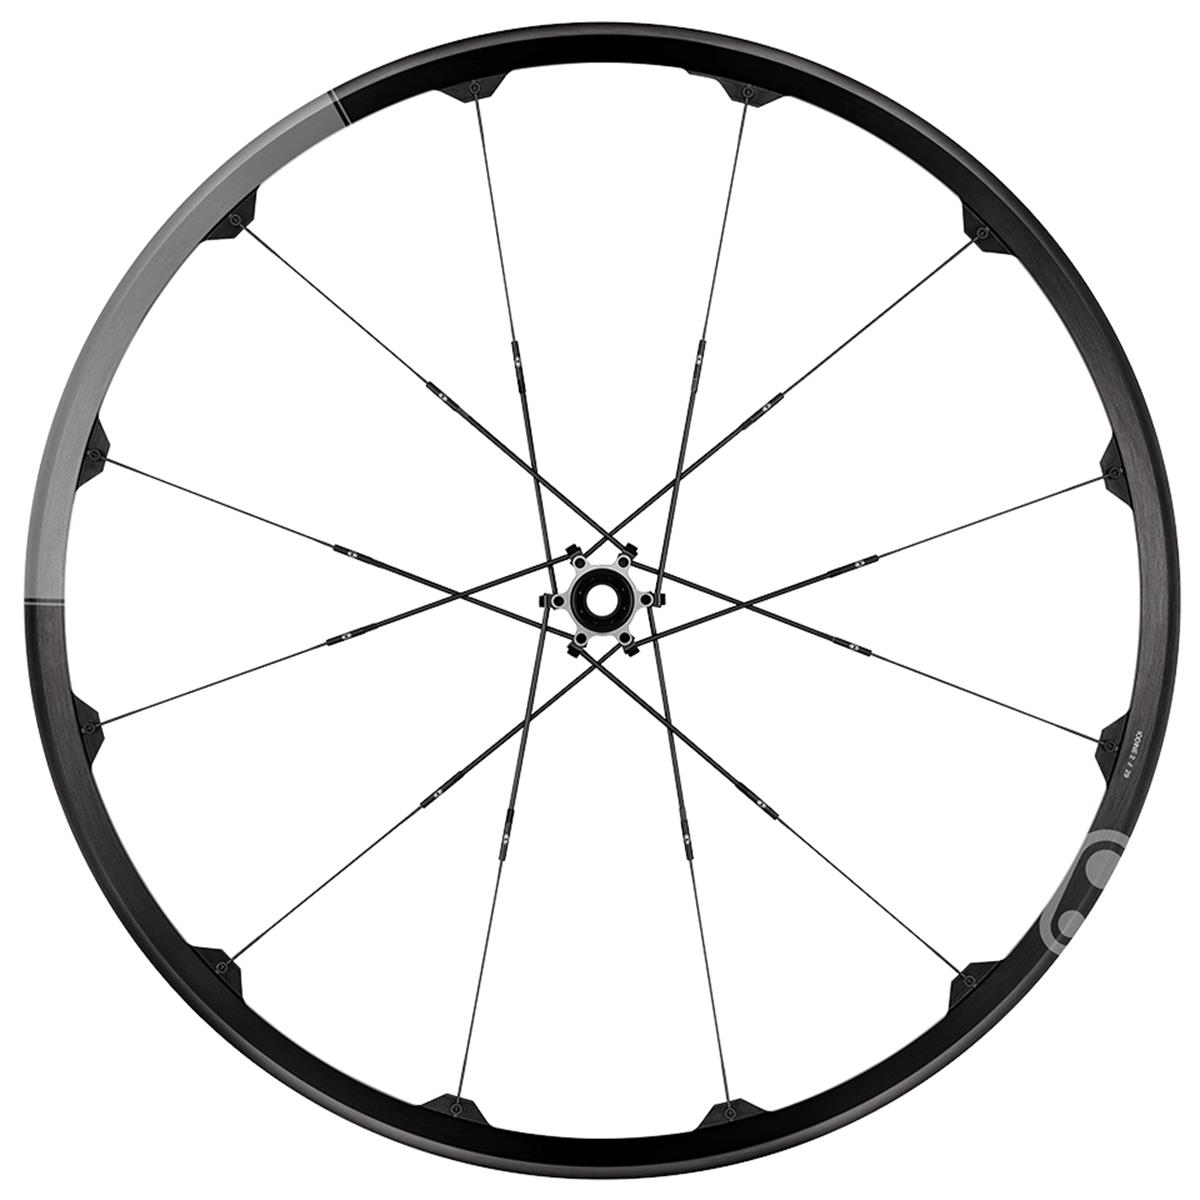 Crankbrothers Wheel Set Iodine 2 Black/Grey, 27.5 Inches, 15x110 mm/12x148 mm, BOOST, Tubeless Ready